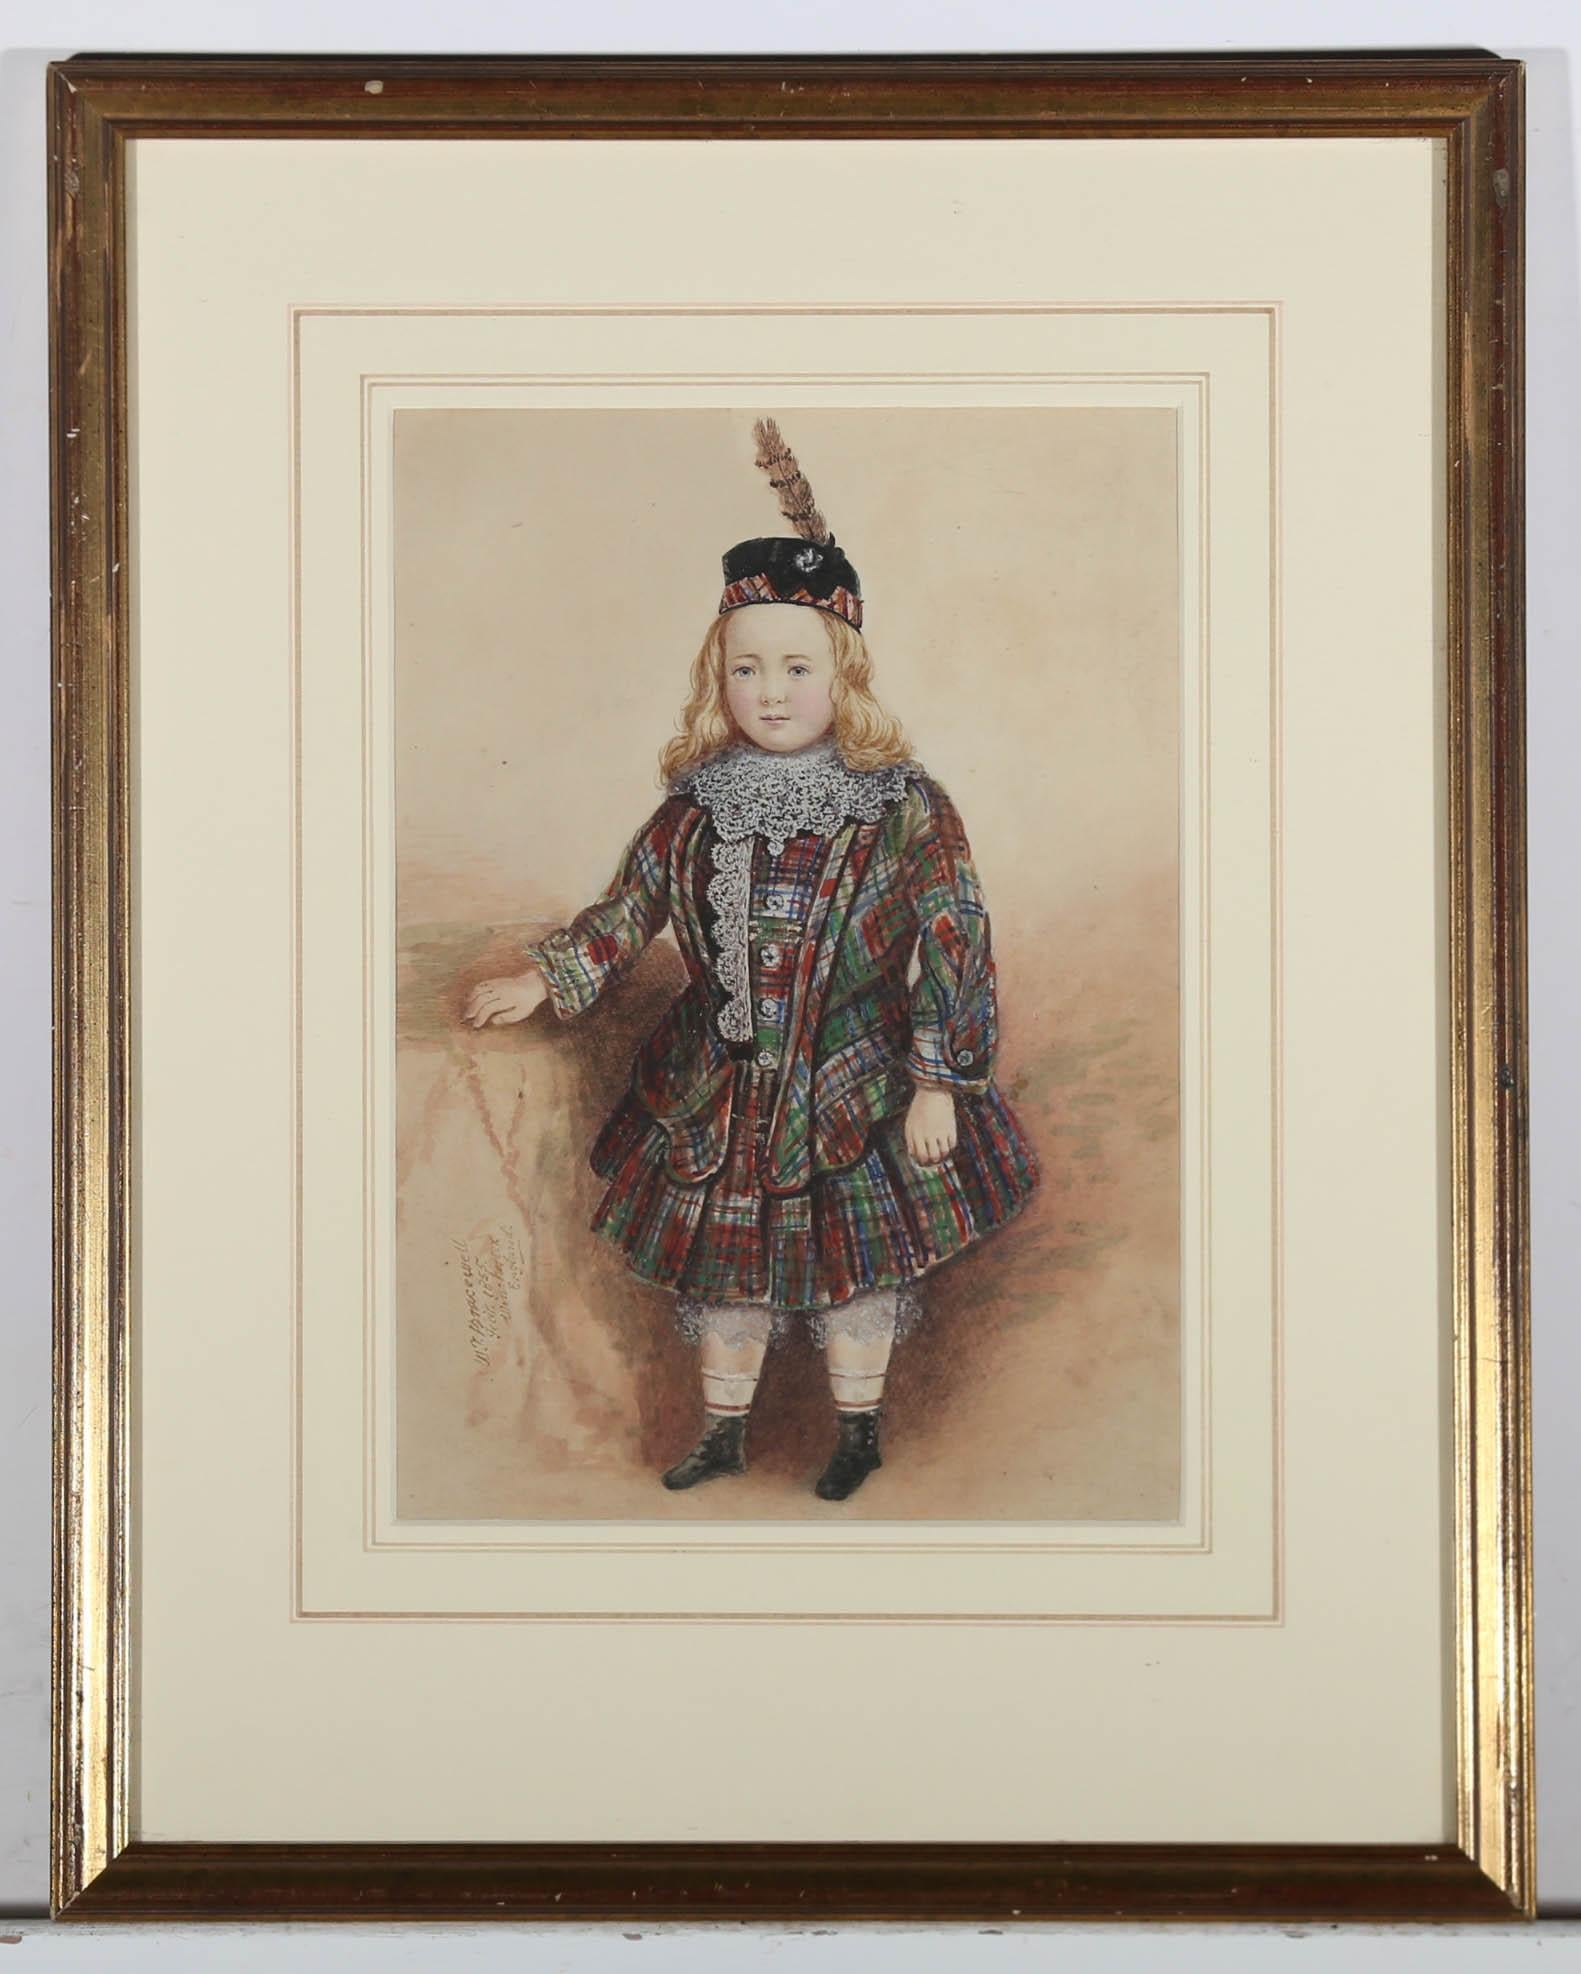 A full length and highly detailed watercolour portrait of a child wearing traditional tartan. Signed and dated (1855) to the lower left. Finely presented in a slim gilt frame with a complimenting mount. On paper.